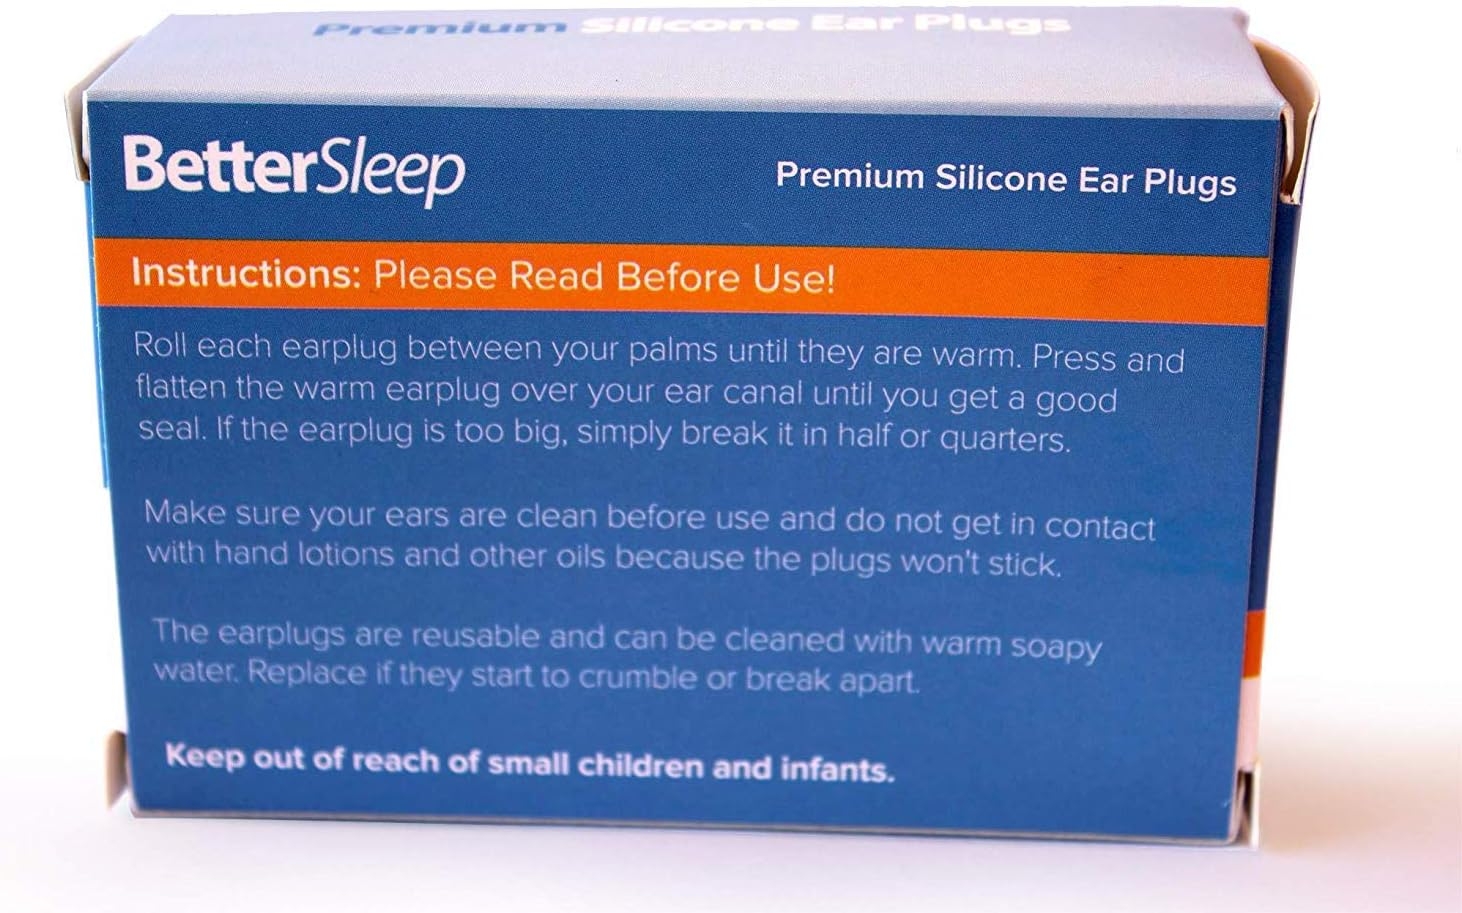 Ear Plugs for Sleeping from Better Sleep - Moldable Silicone, Swimming, Studying, Snoring, Concerts, Noise Cancelling